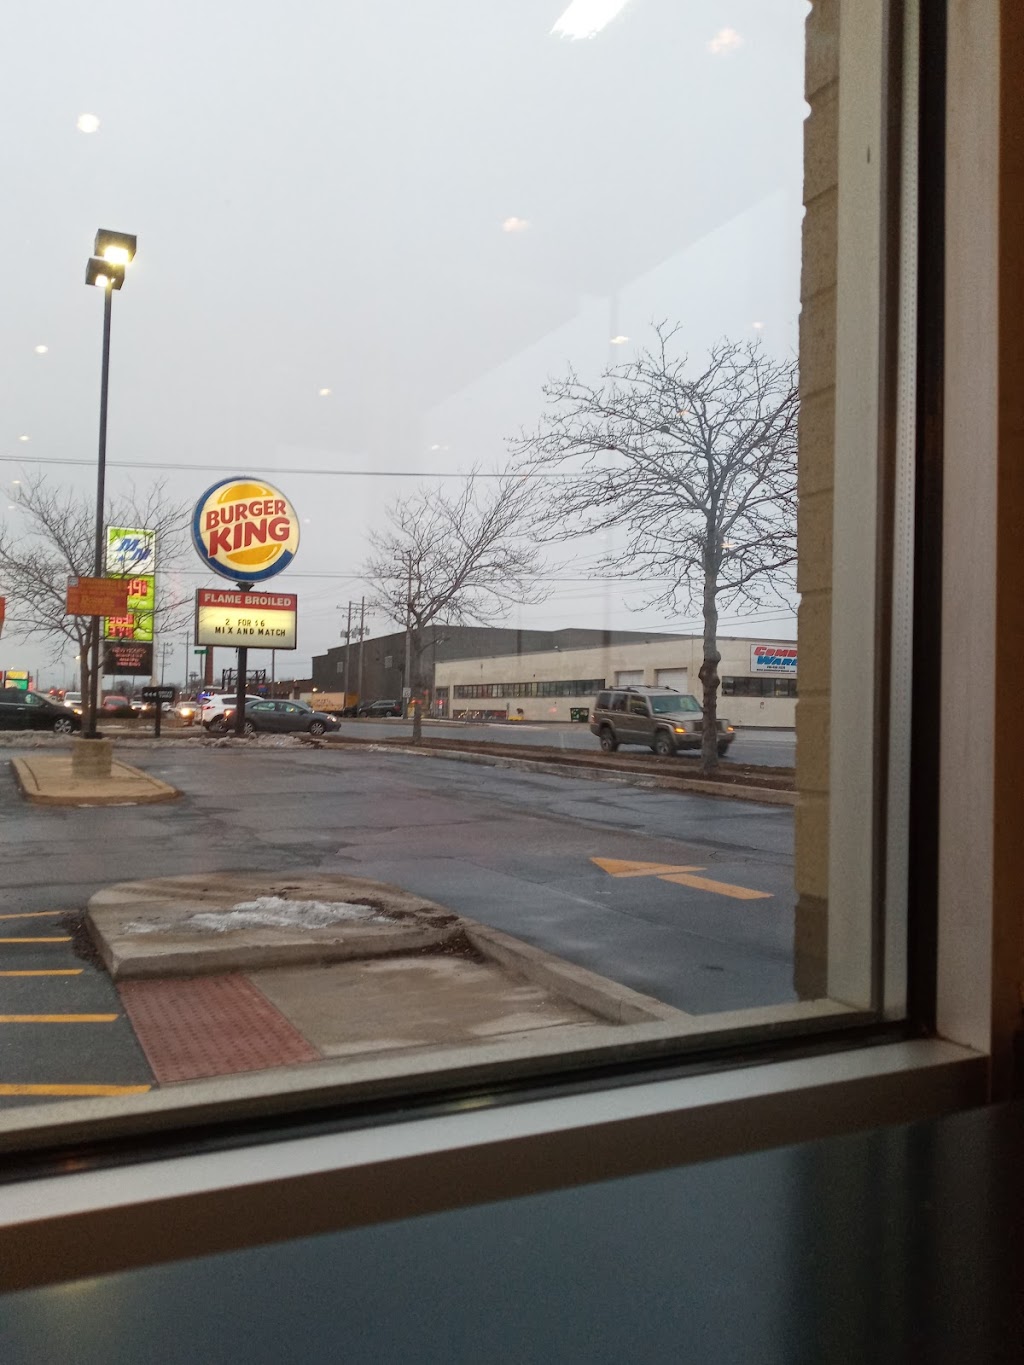 Burger King | 4851 S Central Ave, Chicago, IL 60638 | Phone: (708) 458-1129